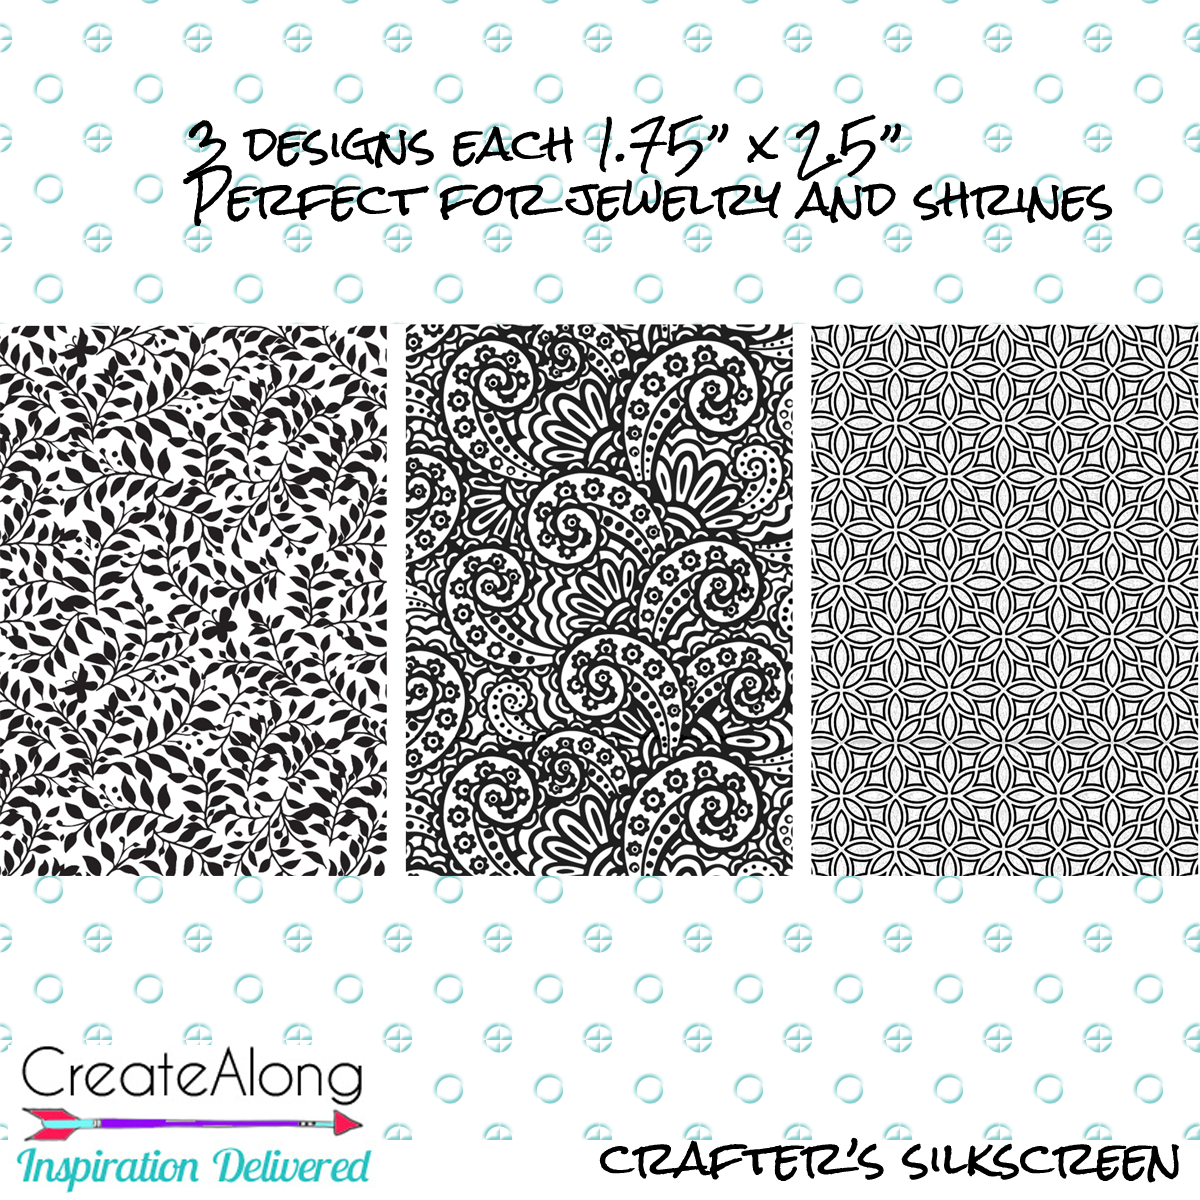 Silkscreen Stencil Shrines 1 3 Patterns For Crafting For Polymer Clay + Mixed Media - Polymer Clay TV tutorial and supplies